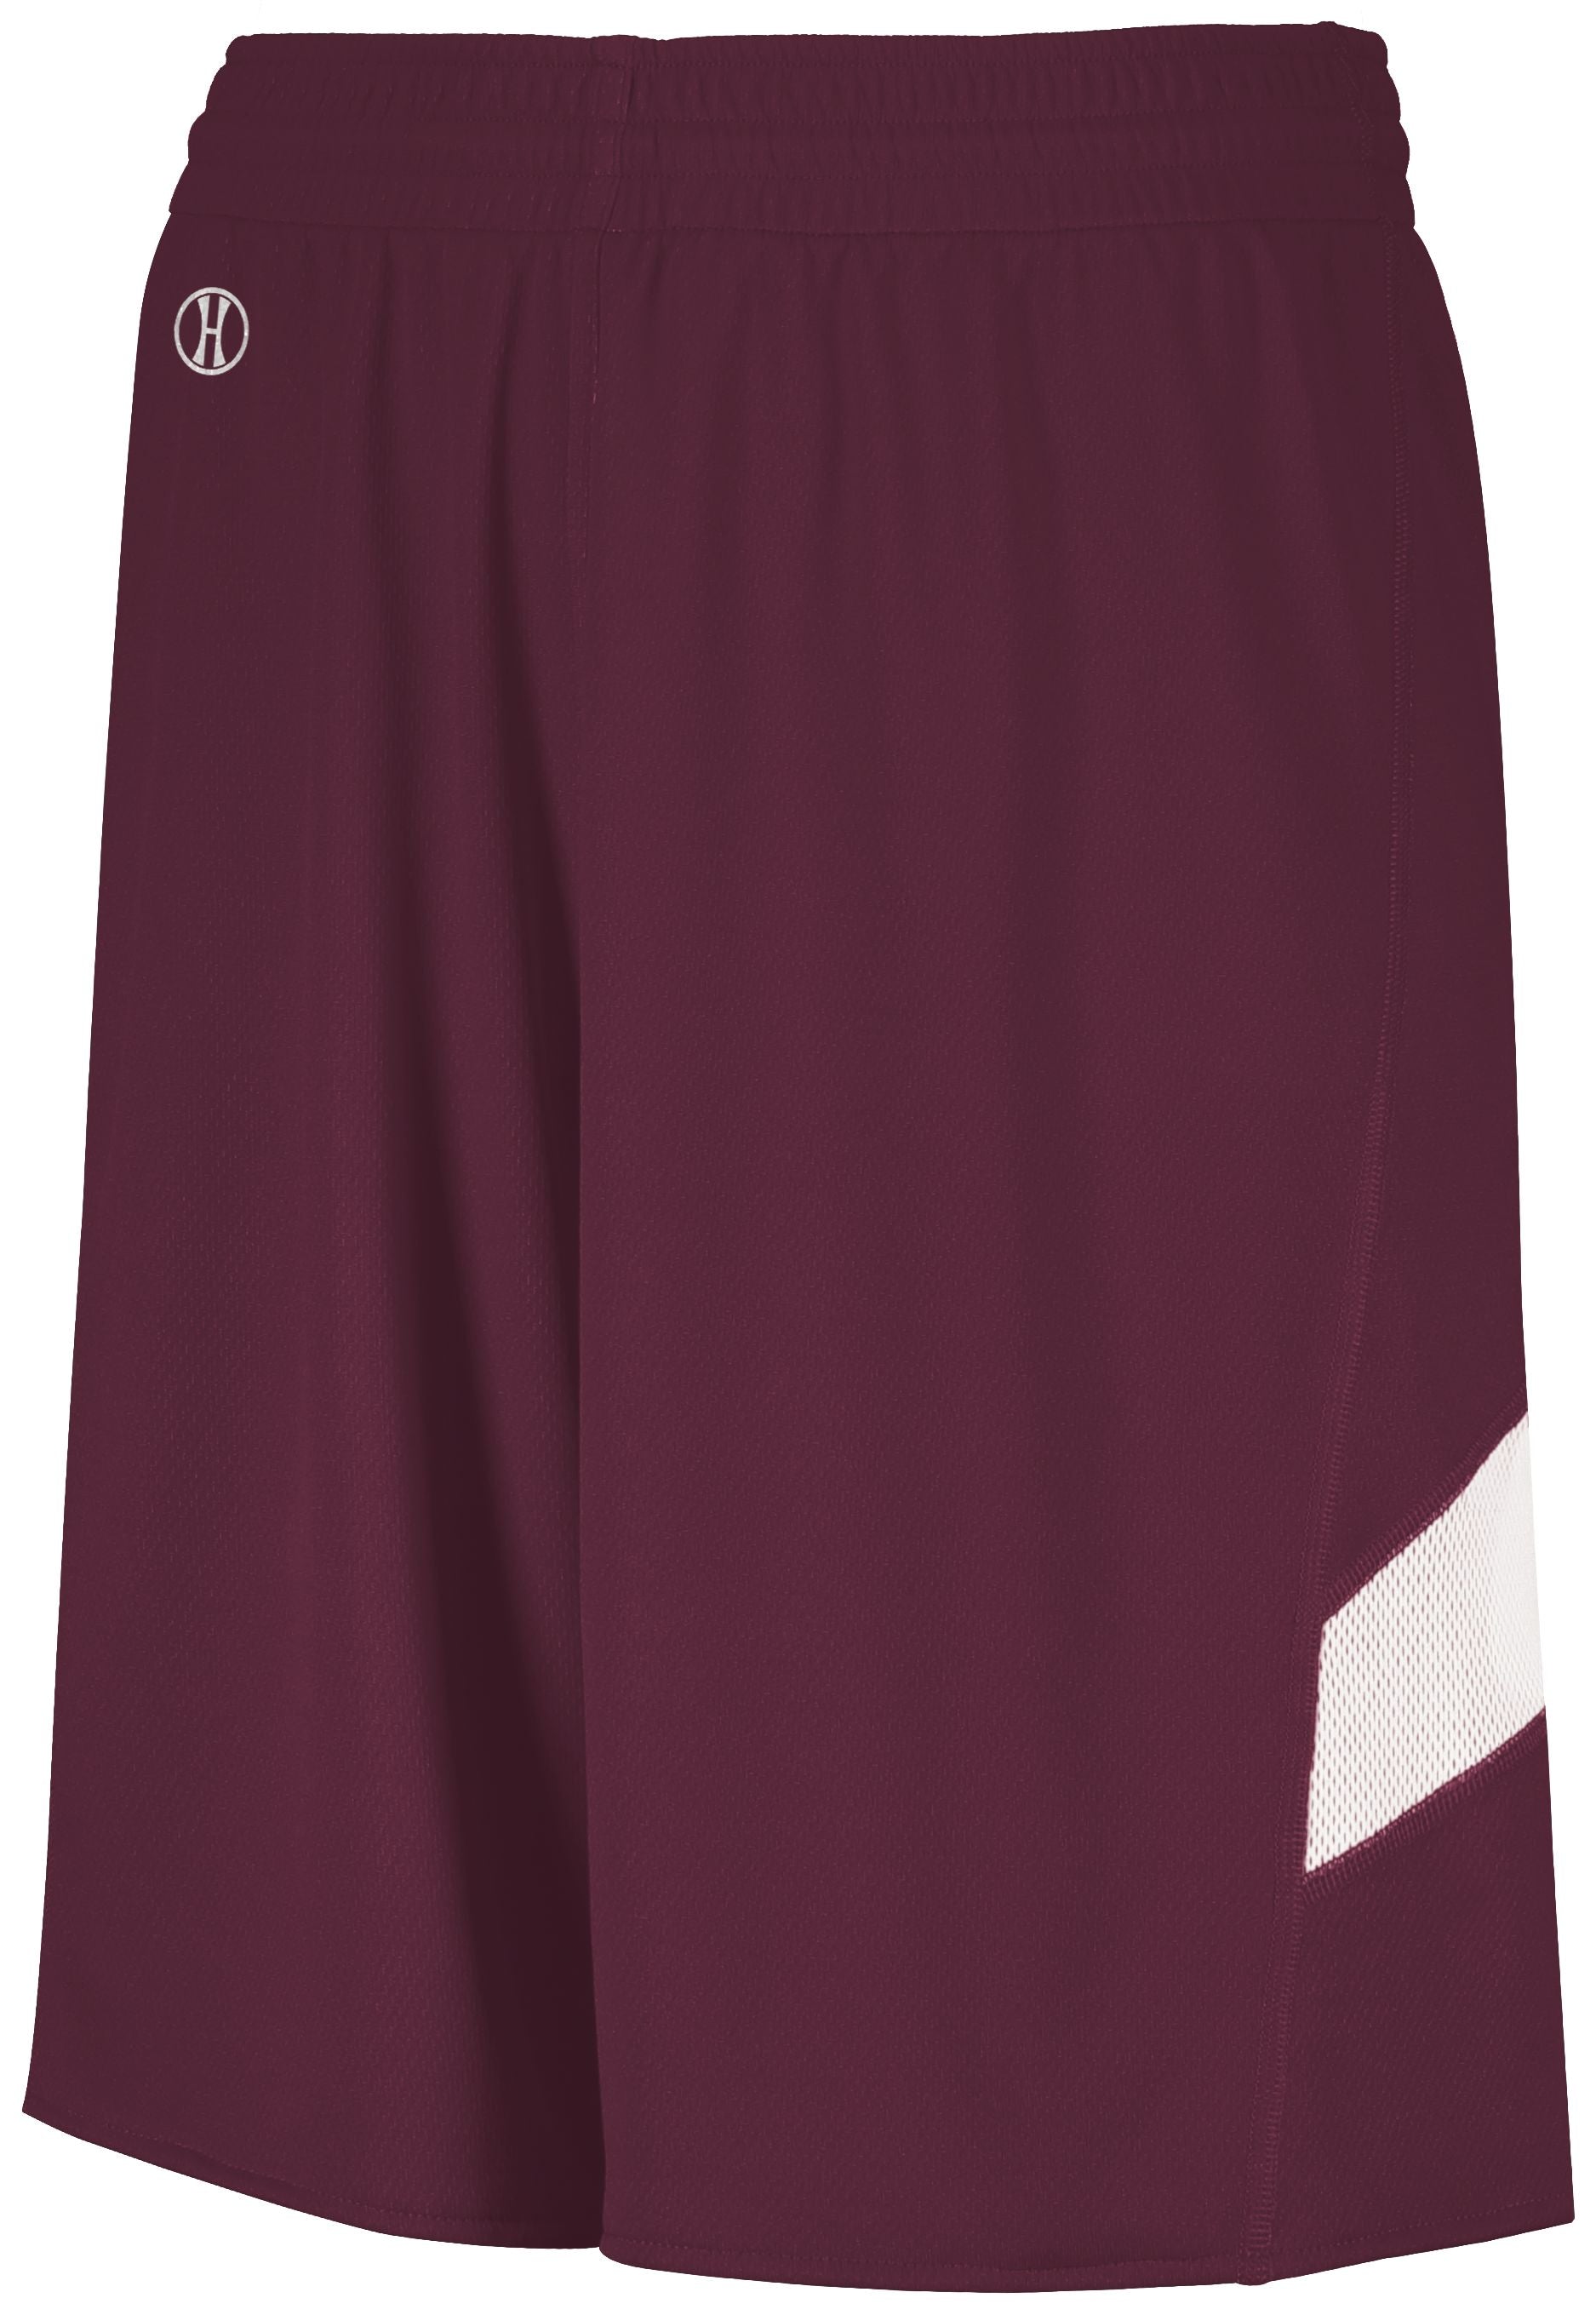 Holloway Youth Dual-Side Single Ply Basketball Shorts in Maroon/White  -Part of the Youth, Youth-Shorts, Basketball, Holloway, All-Sports, All-Sports-1 product lines at KanaleyCreations.com